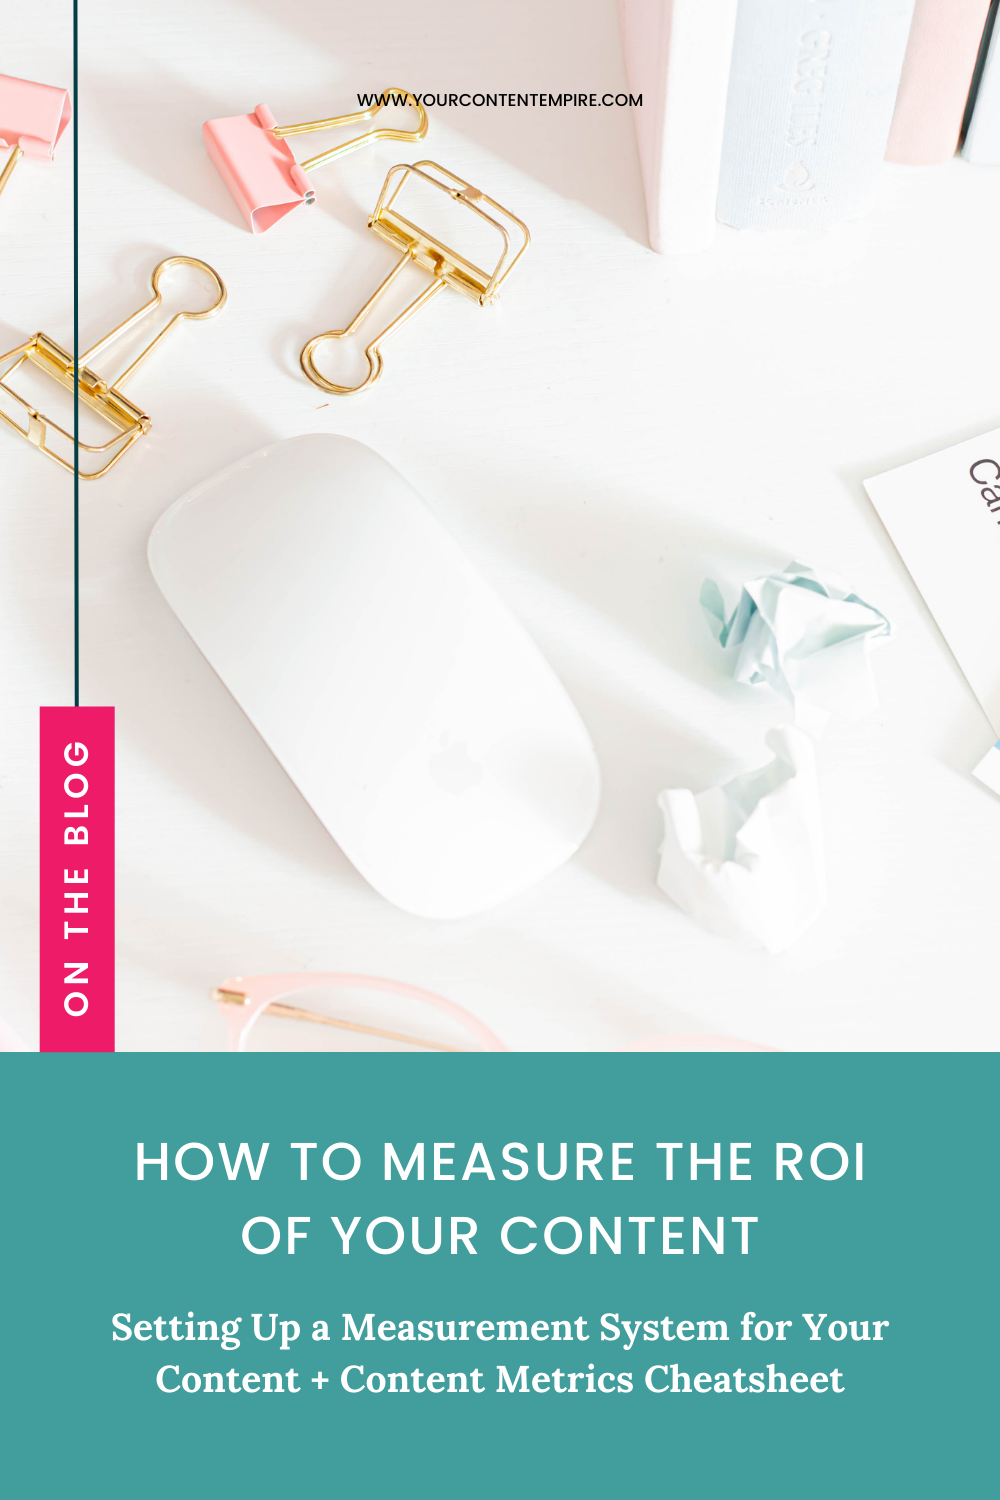 How to Measure the ROI of Your Content